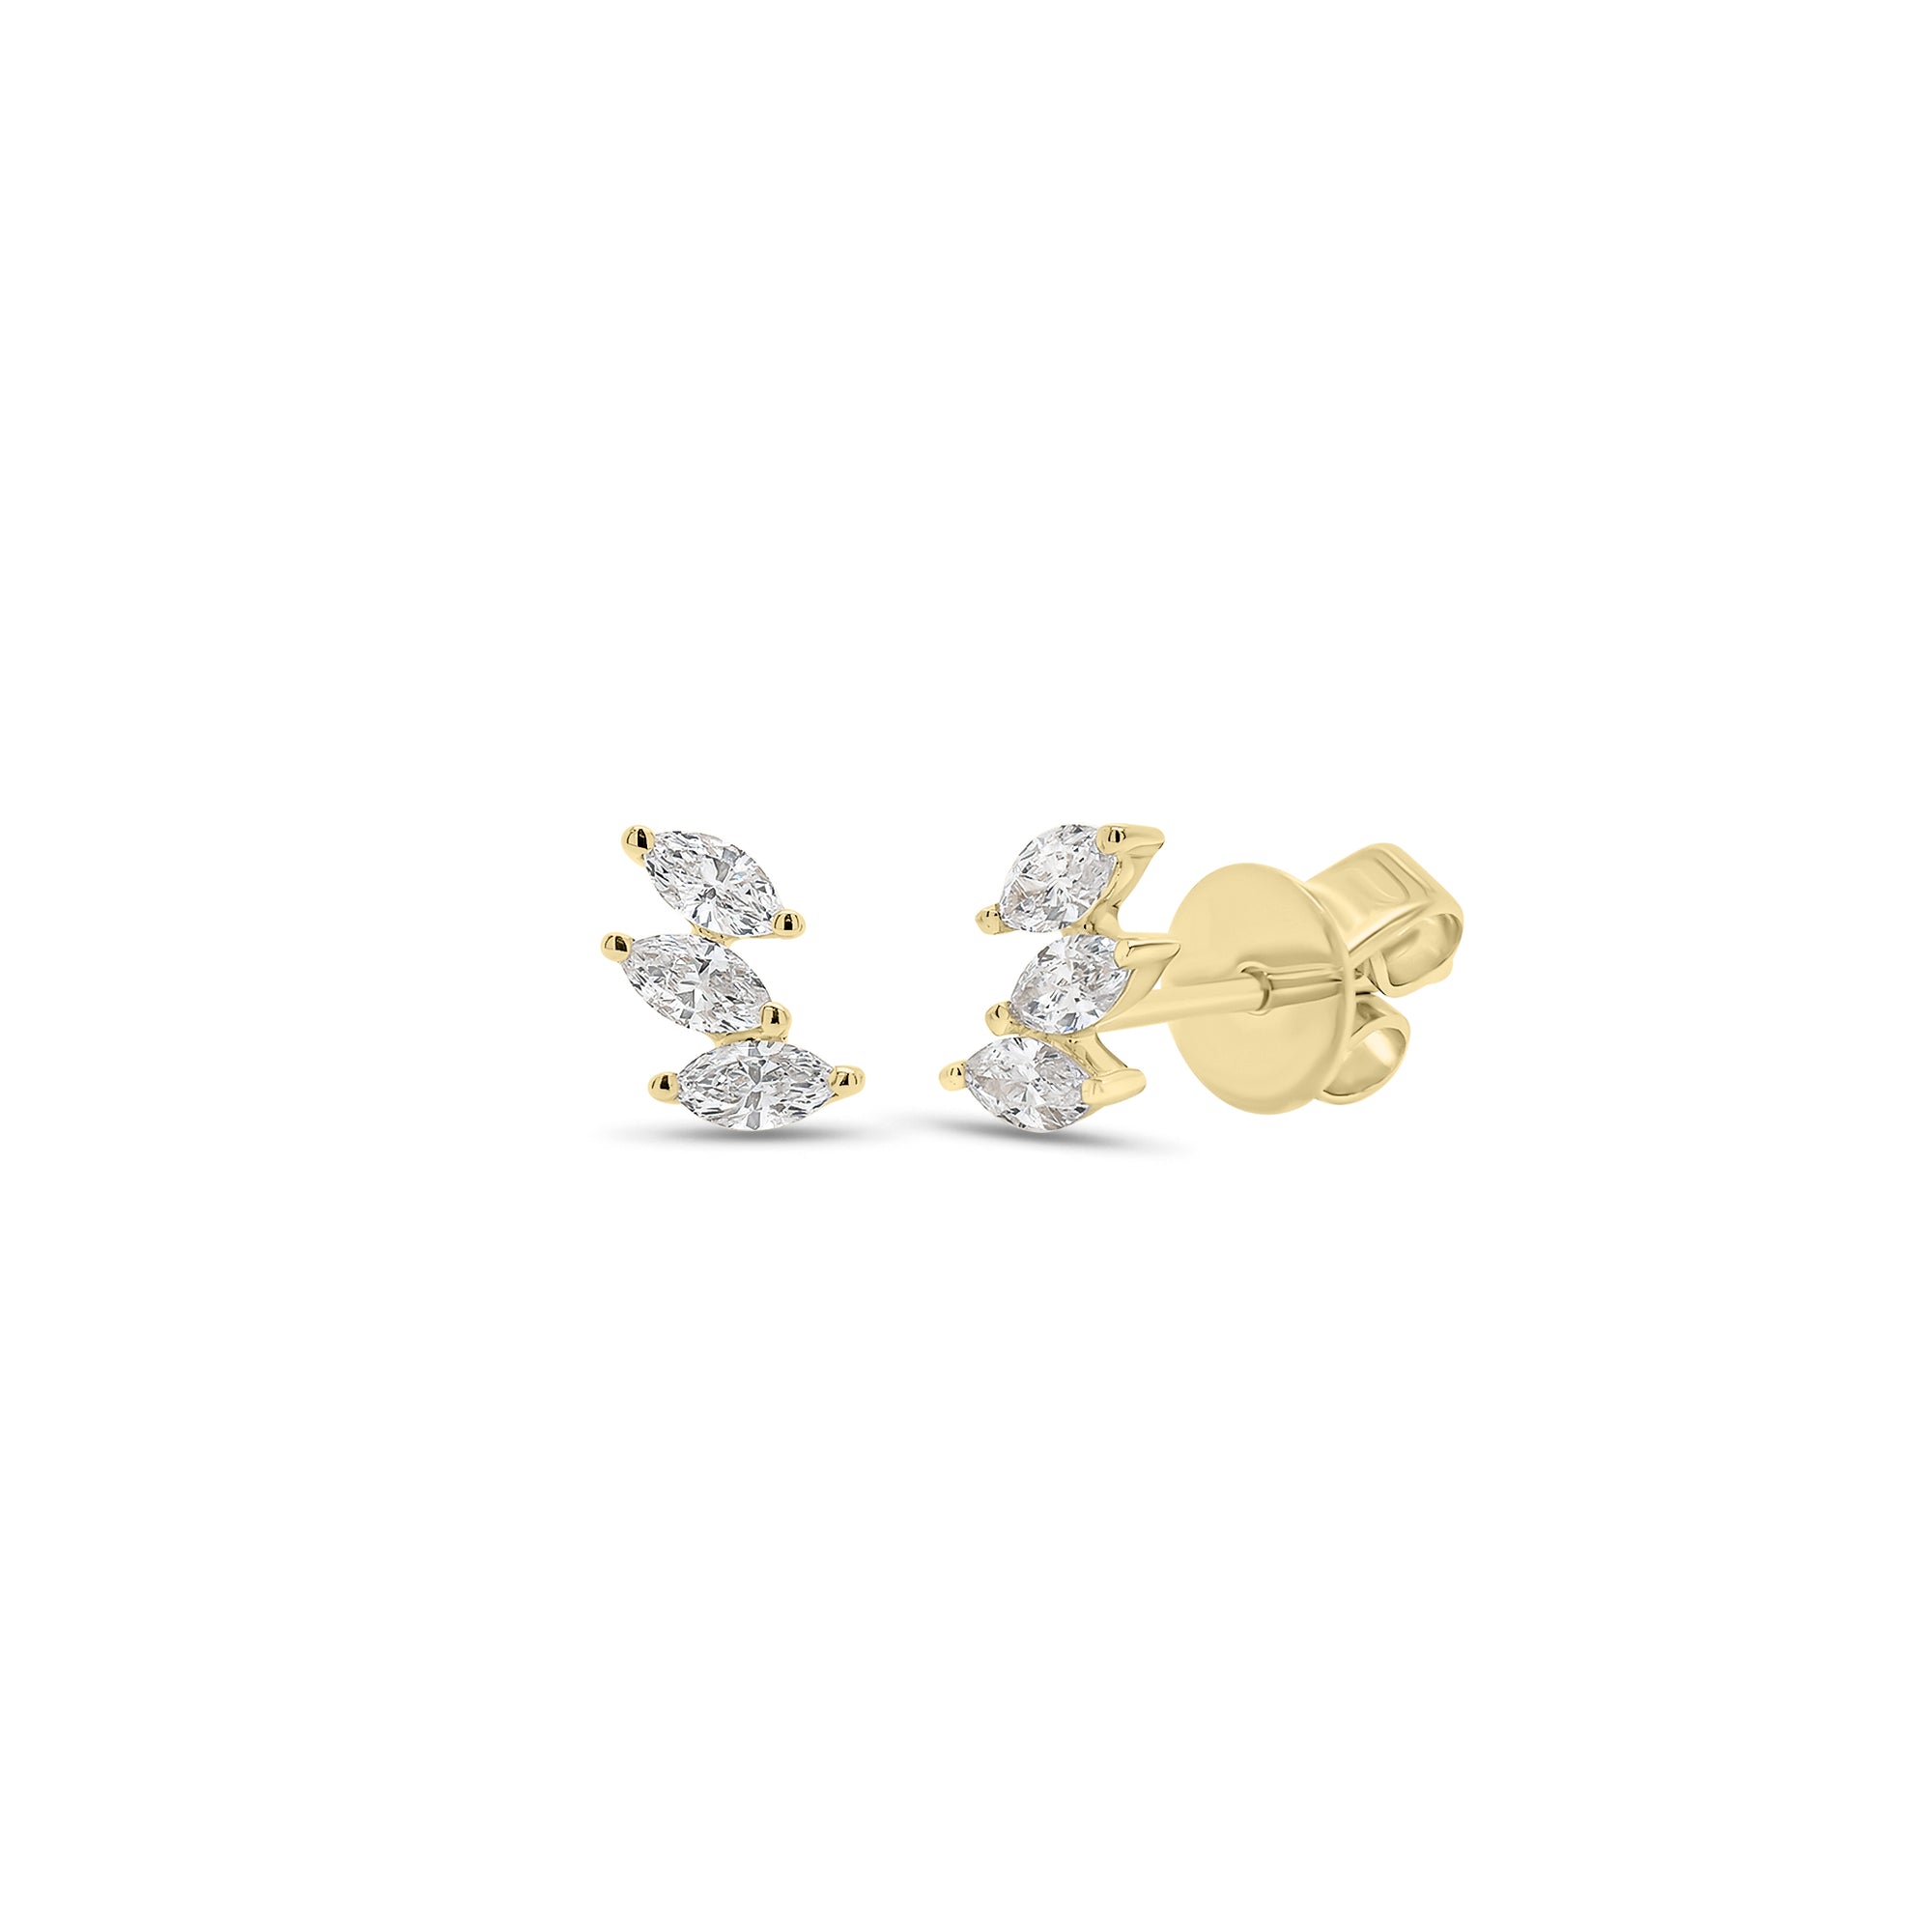 Marquise Diamond Stud Earring - 14K gold weighing 0.83 grams  - 6 marquise-shaped diamonds weighing 0.25 carats